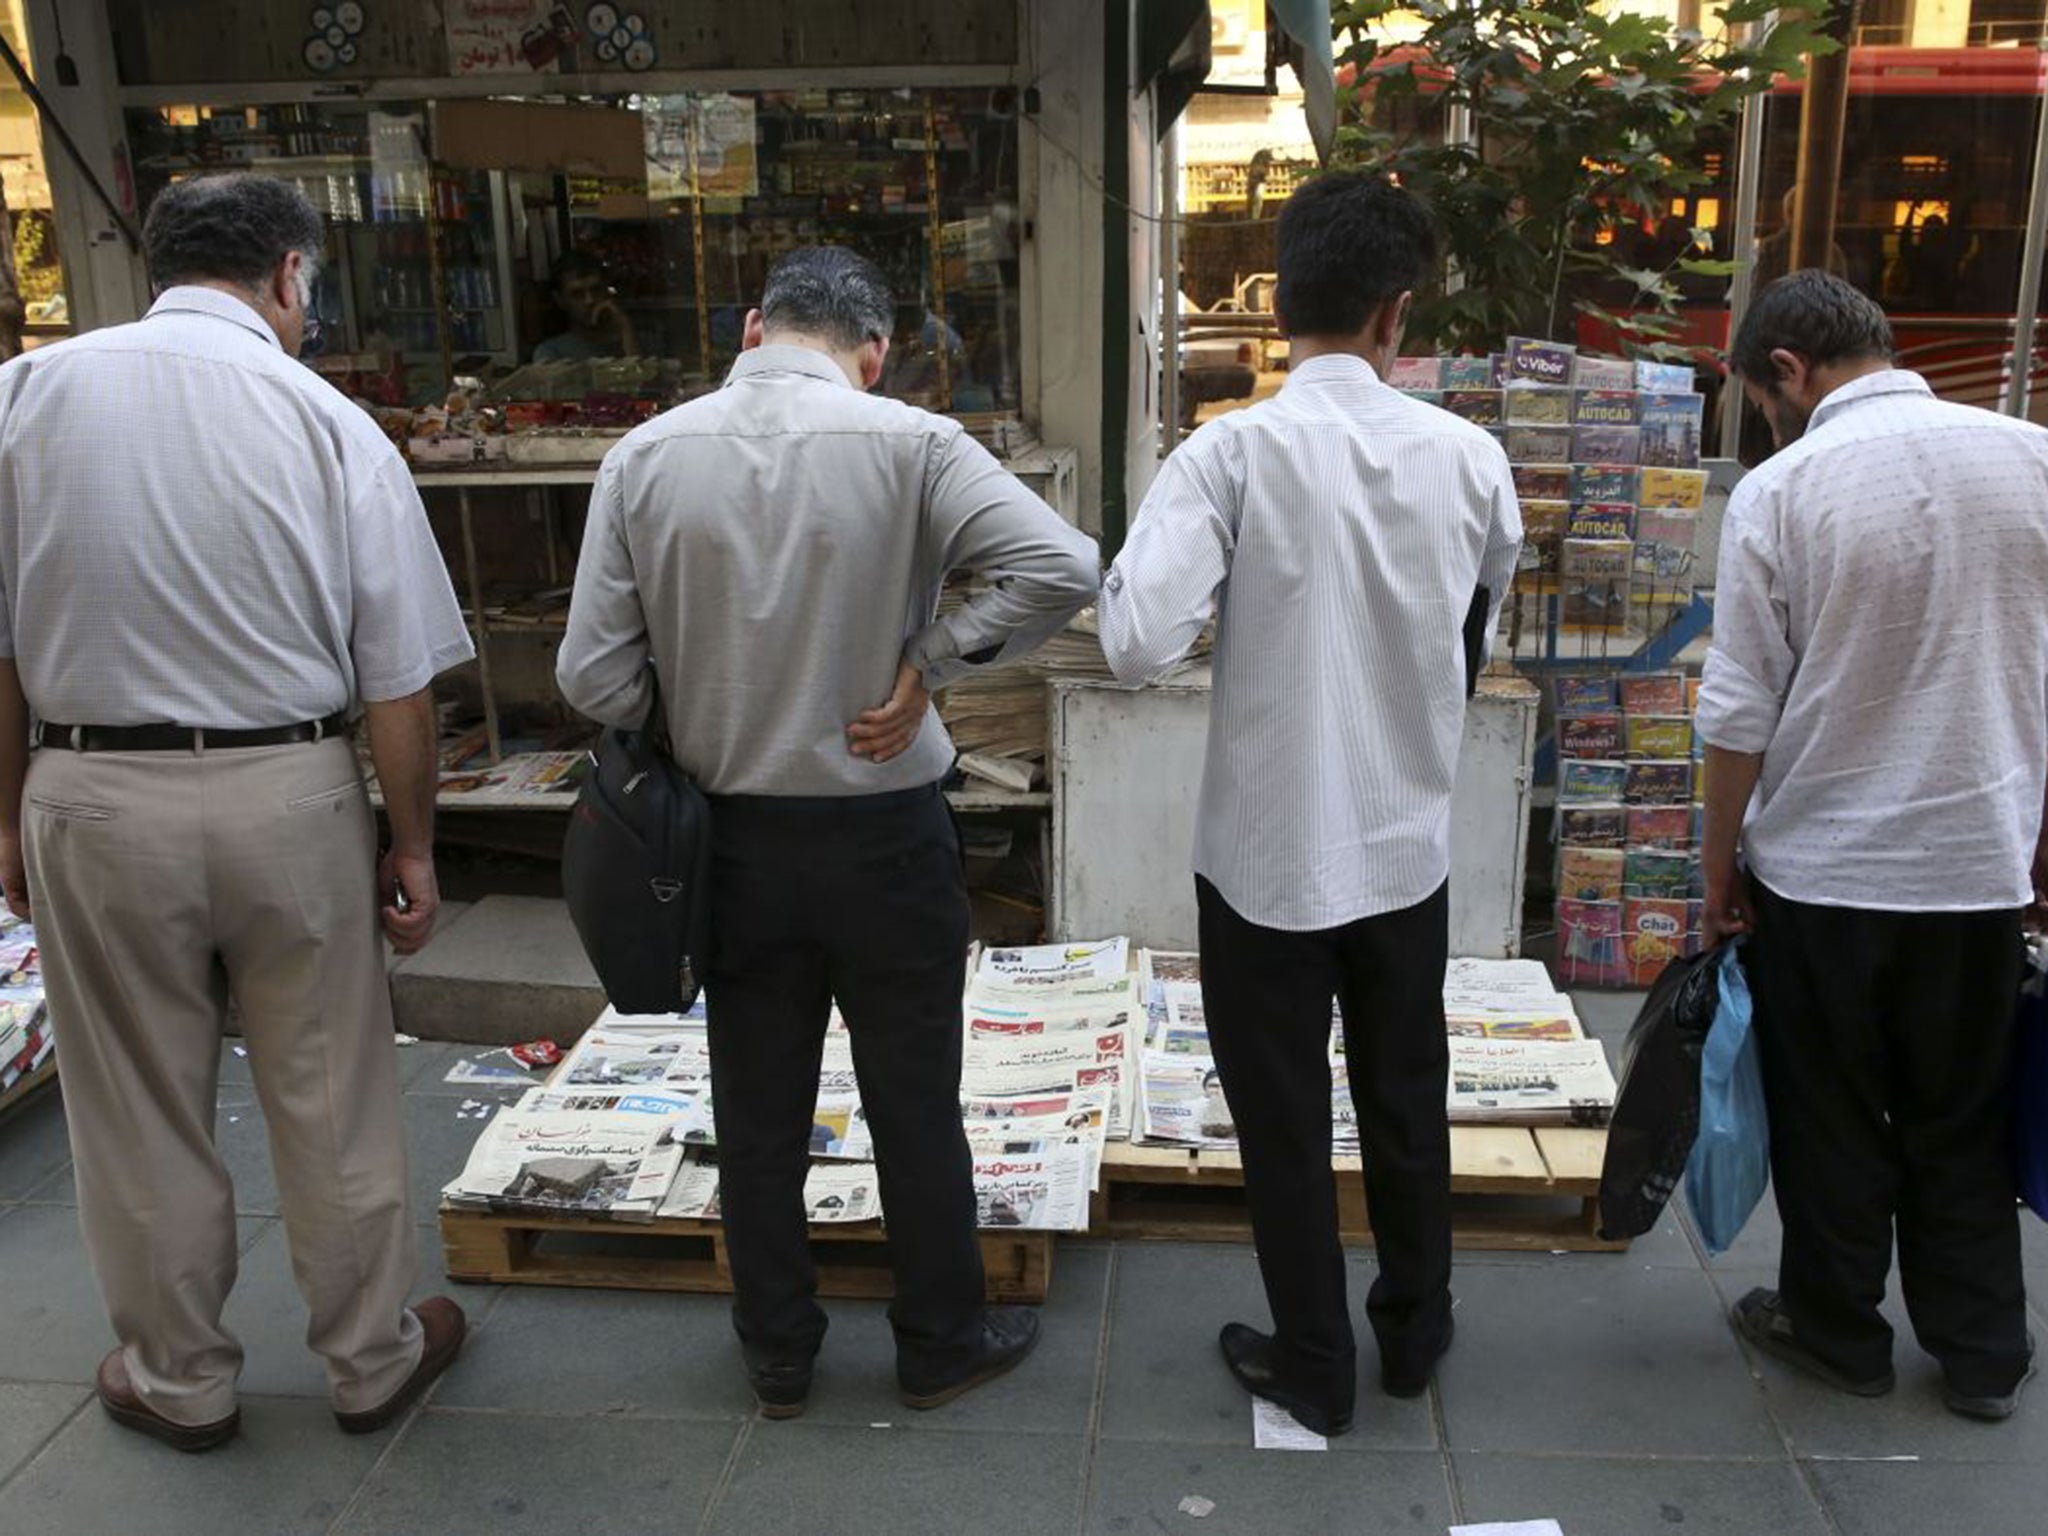 Iranian men scan newspapers in downtown Tehran, Iran, as the talks continued